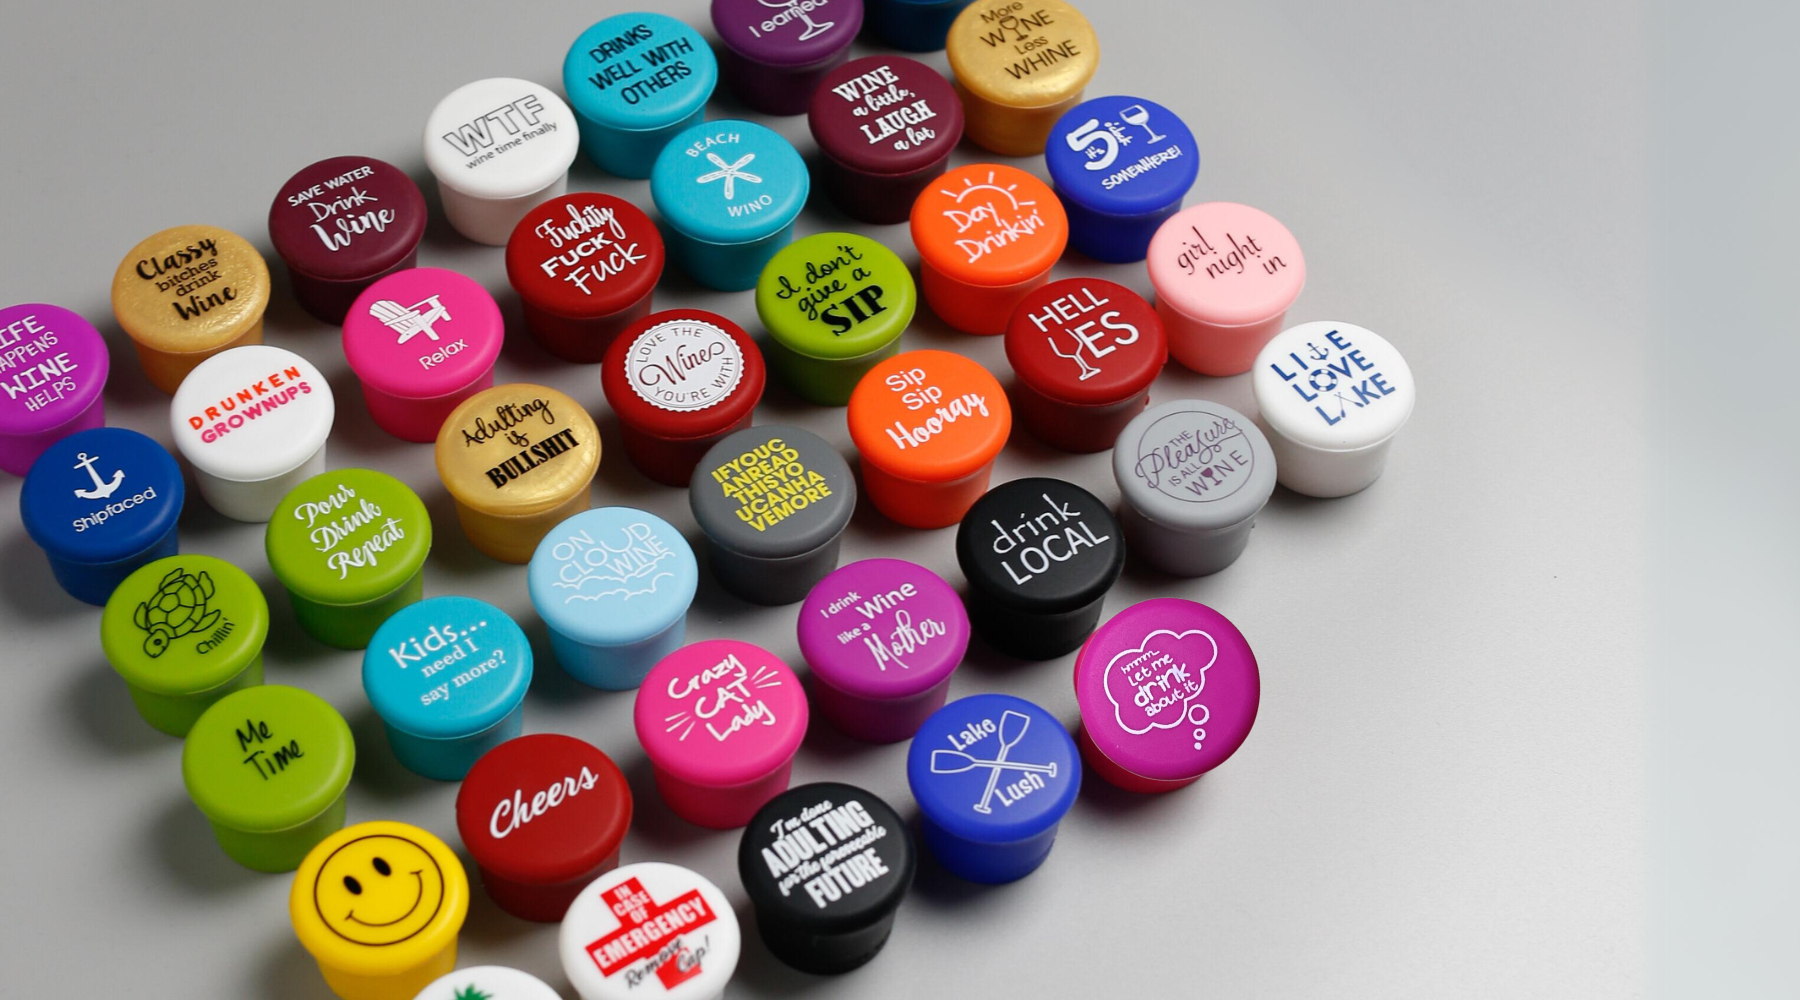  image of CapaBunga's top 40 wine cap designs, featuring a variety of colorful silicone caps designed to securely seal wine bottles and preserve freshness